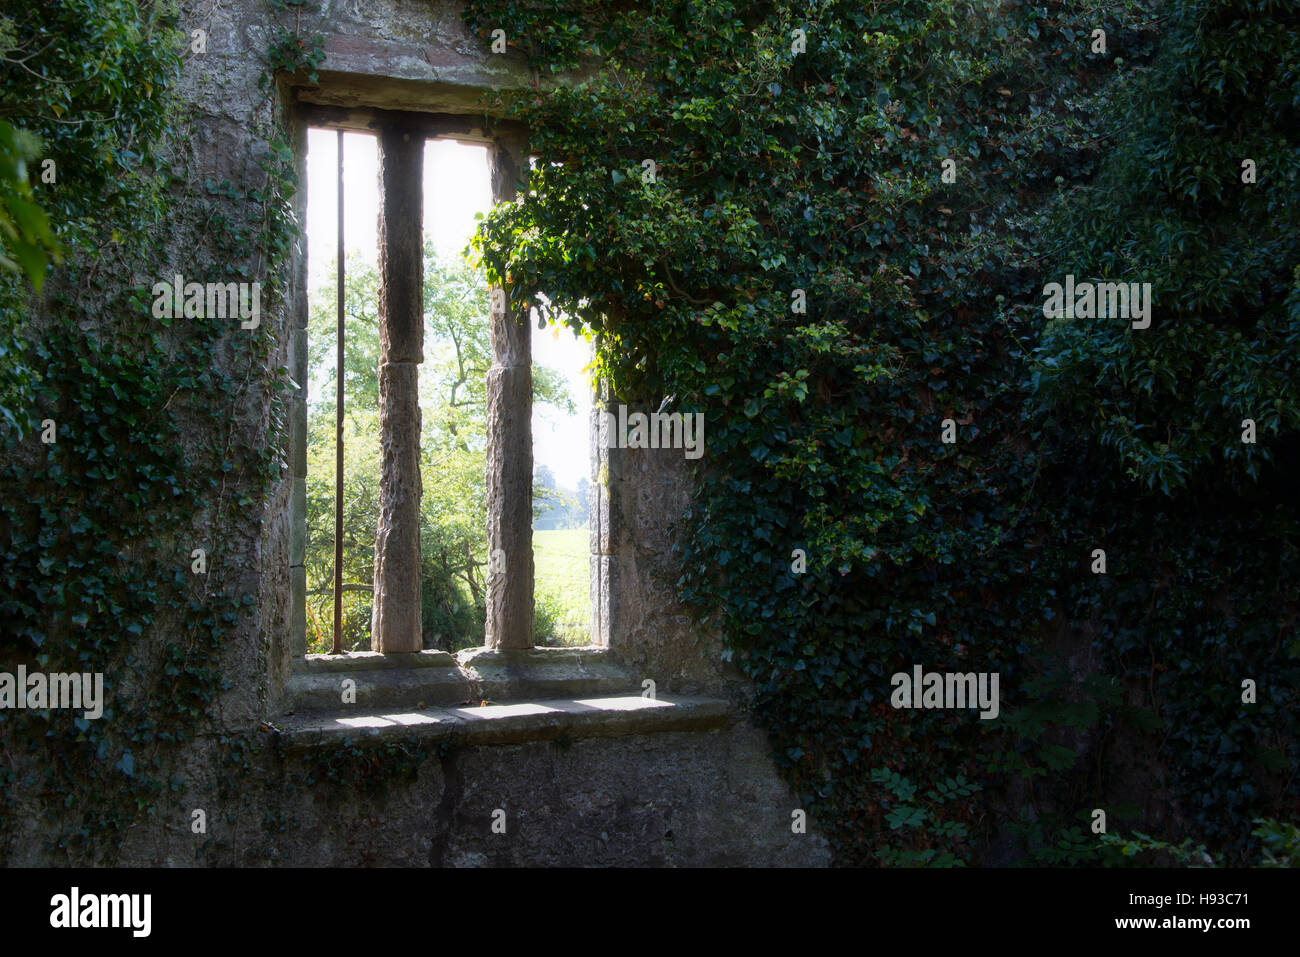 Window located in the Culross West Kirk Parish Church. Film location for the Black Kirk in 'Outlander'. Stock Photo